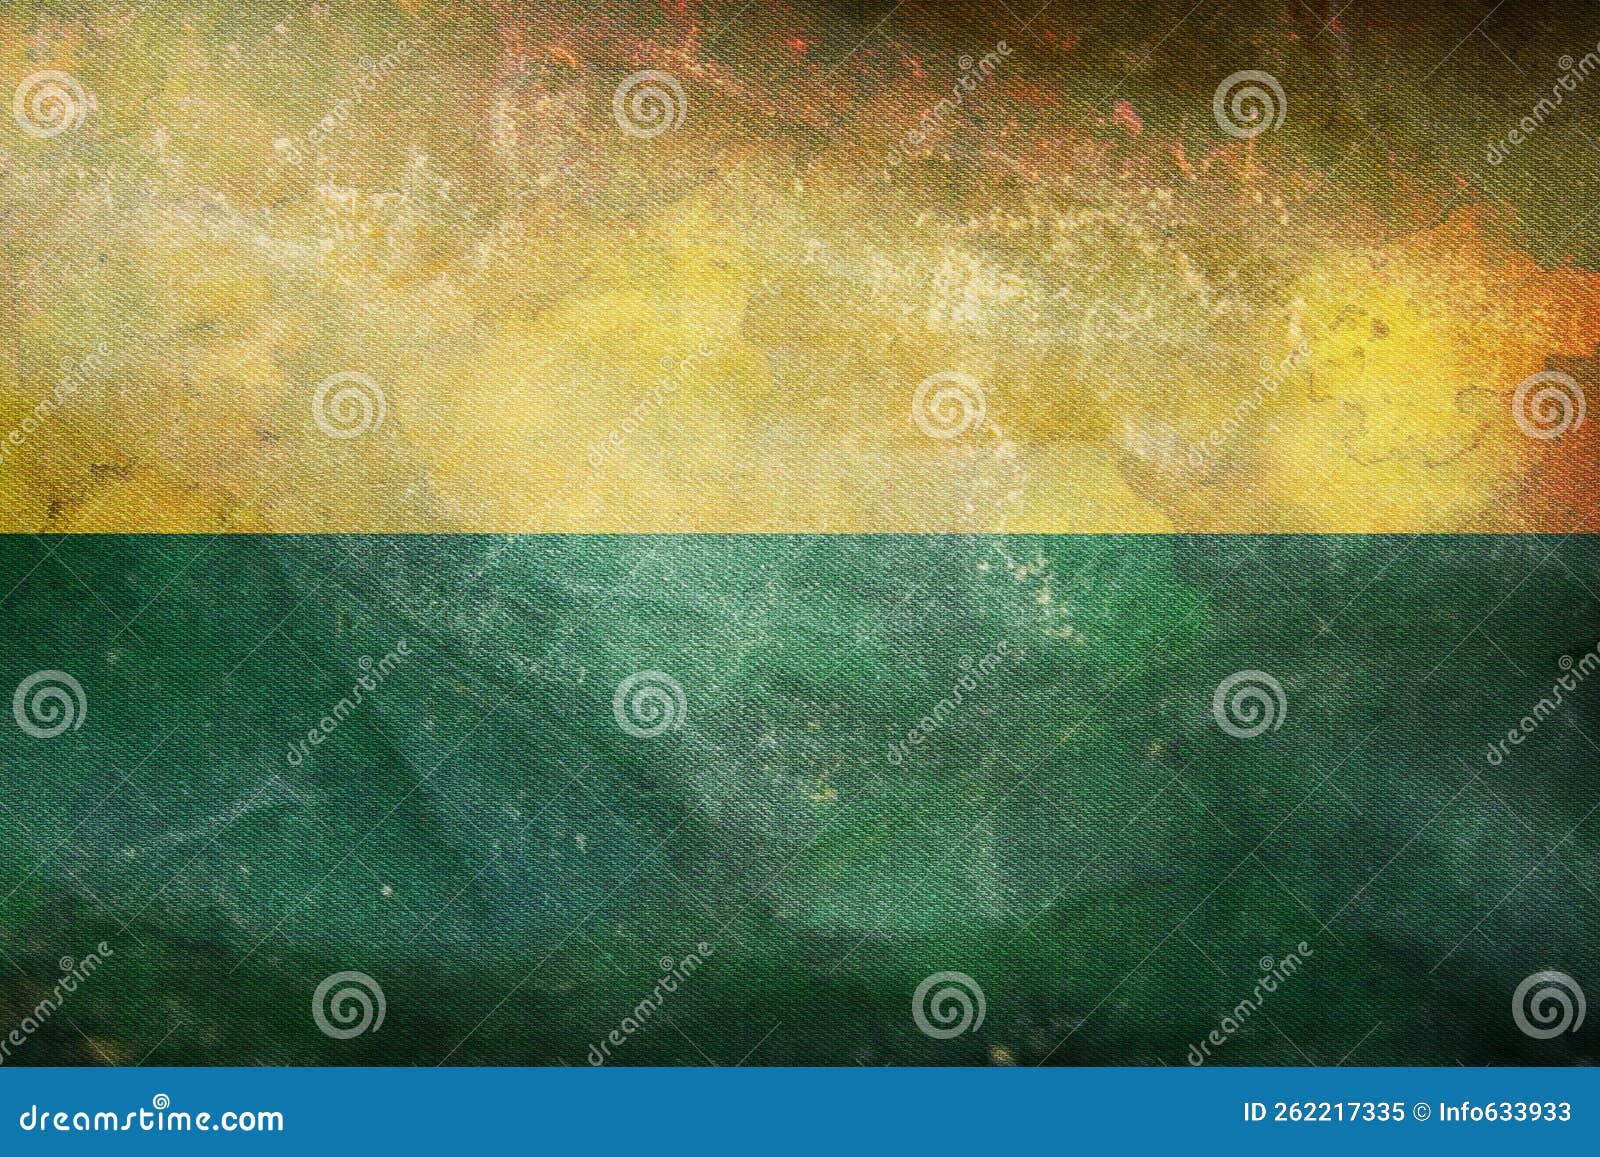 top view of retro flag vichada colombia with grunge texture. colombian patriot and travel concept. no flagpole. plane ,